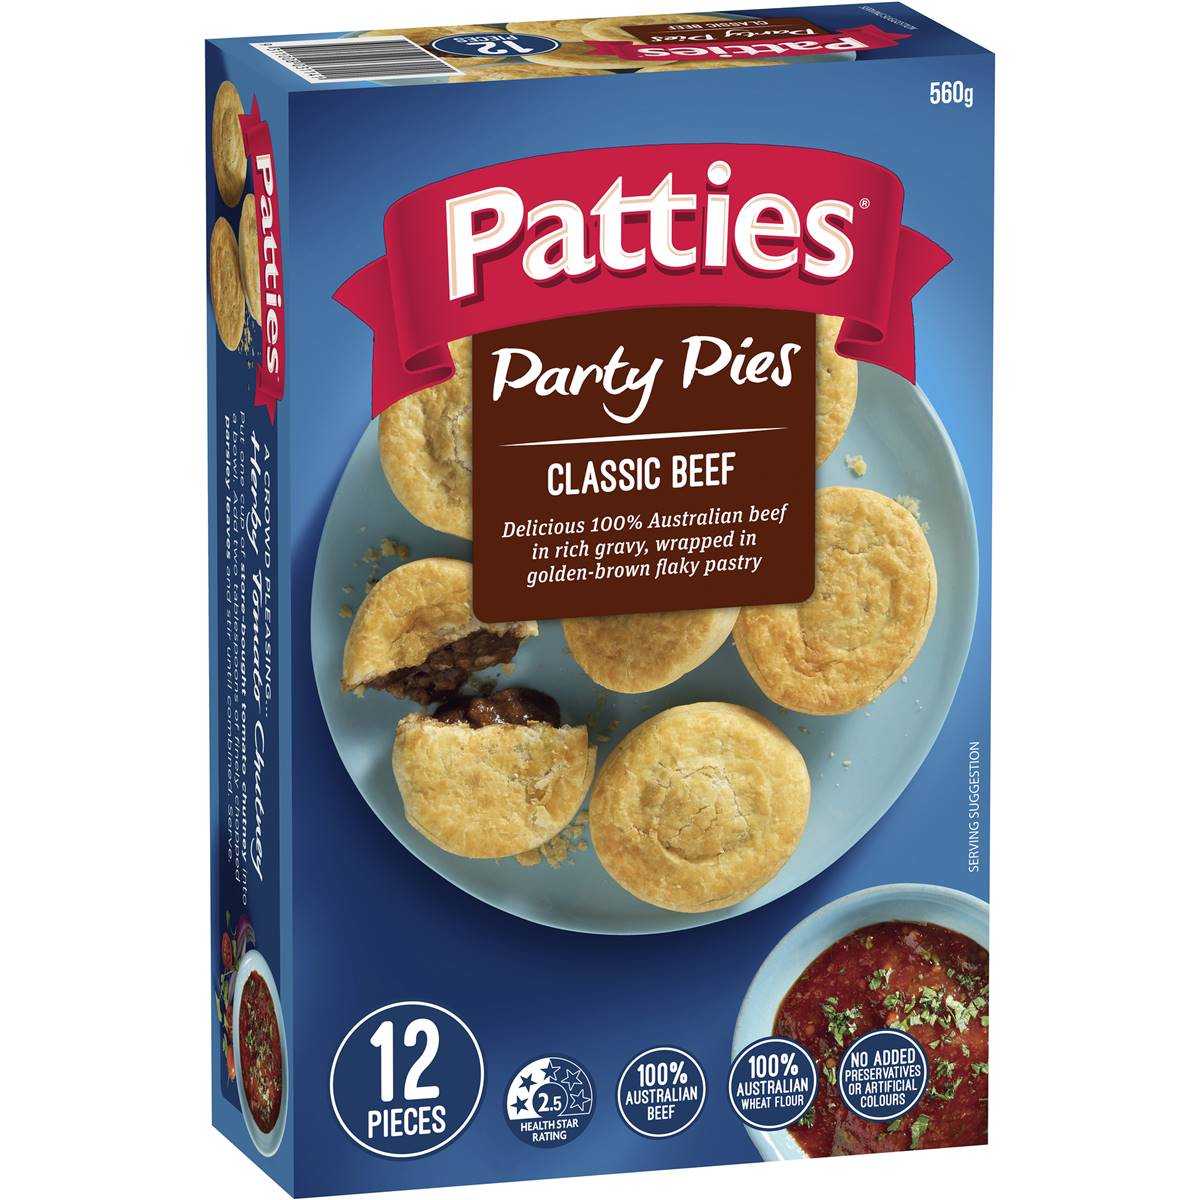 Patties Party Pies Beef 12 pack 560g